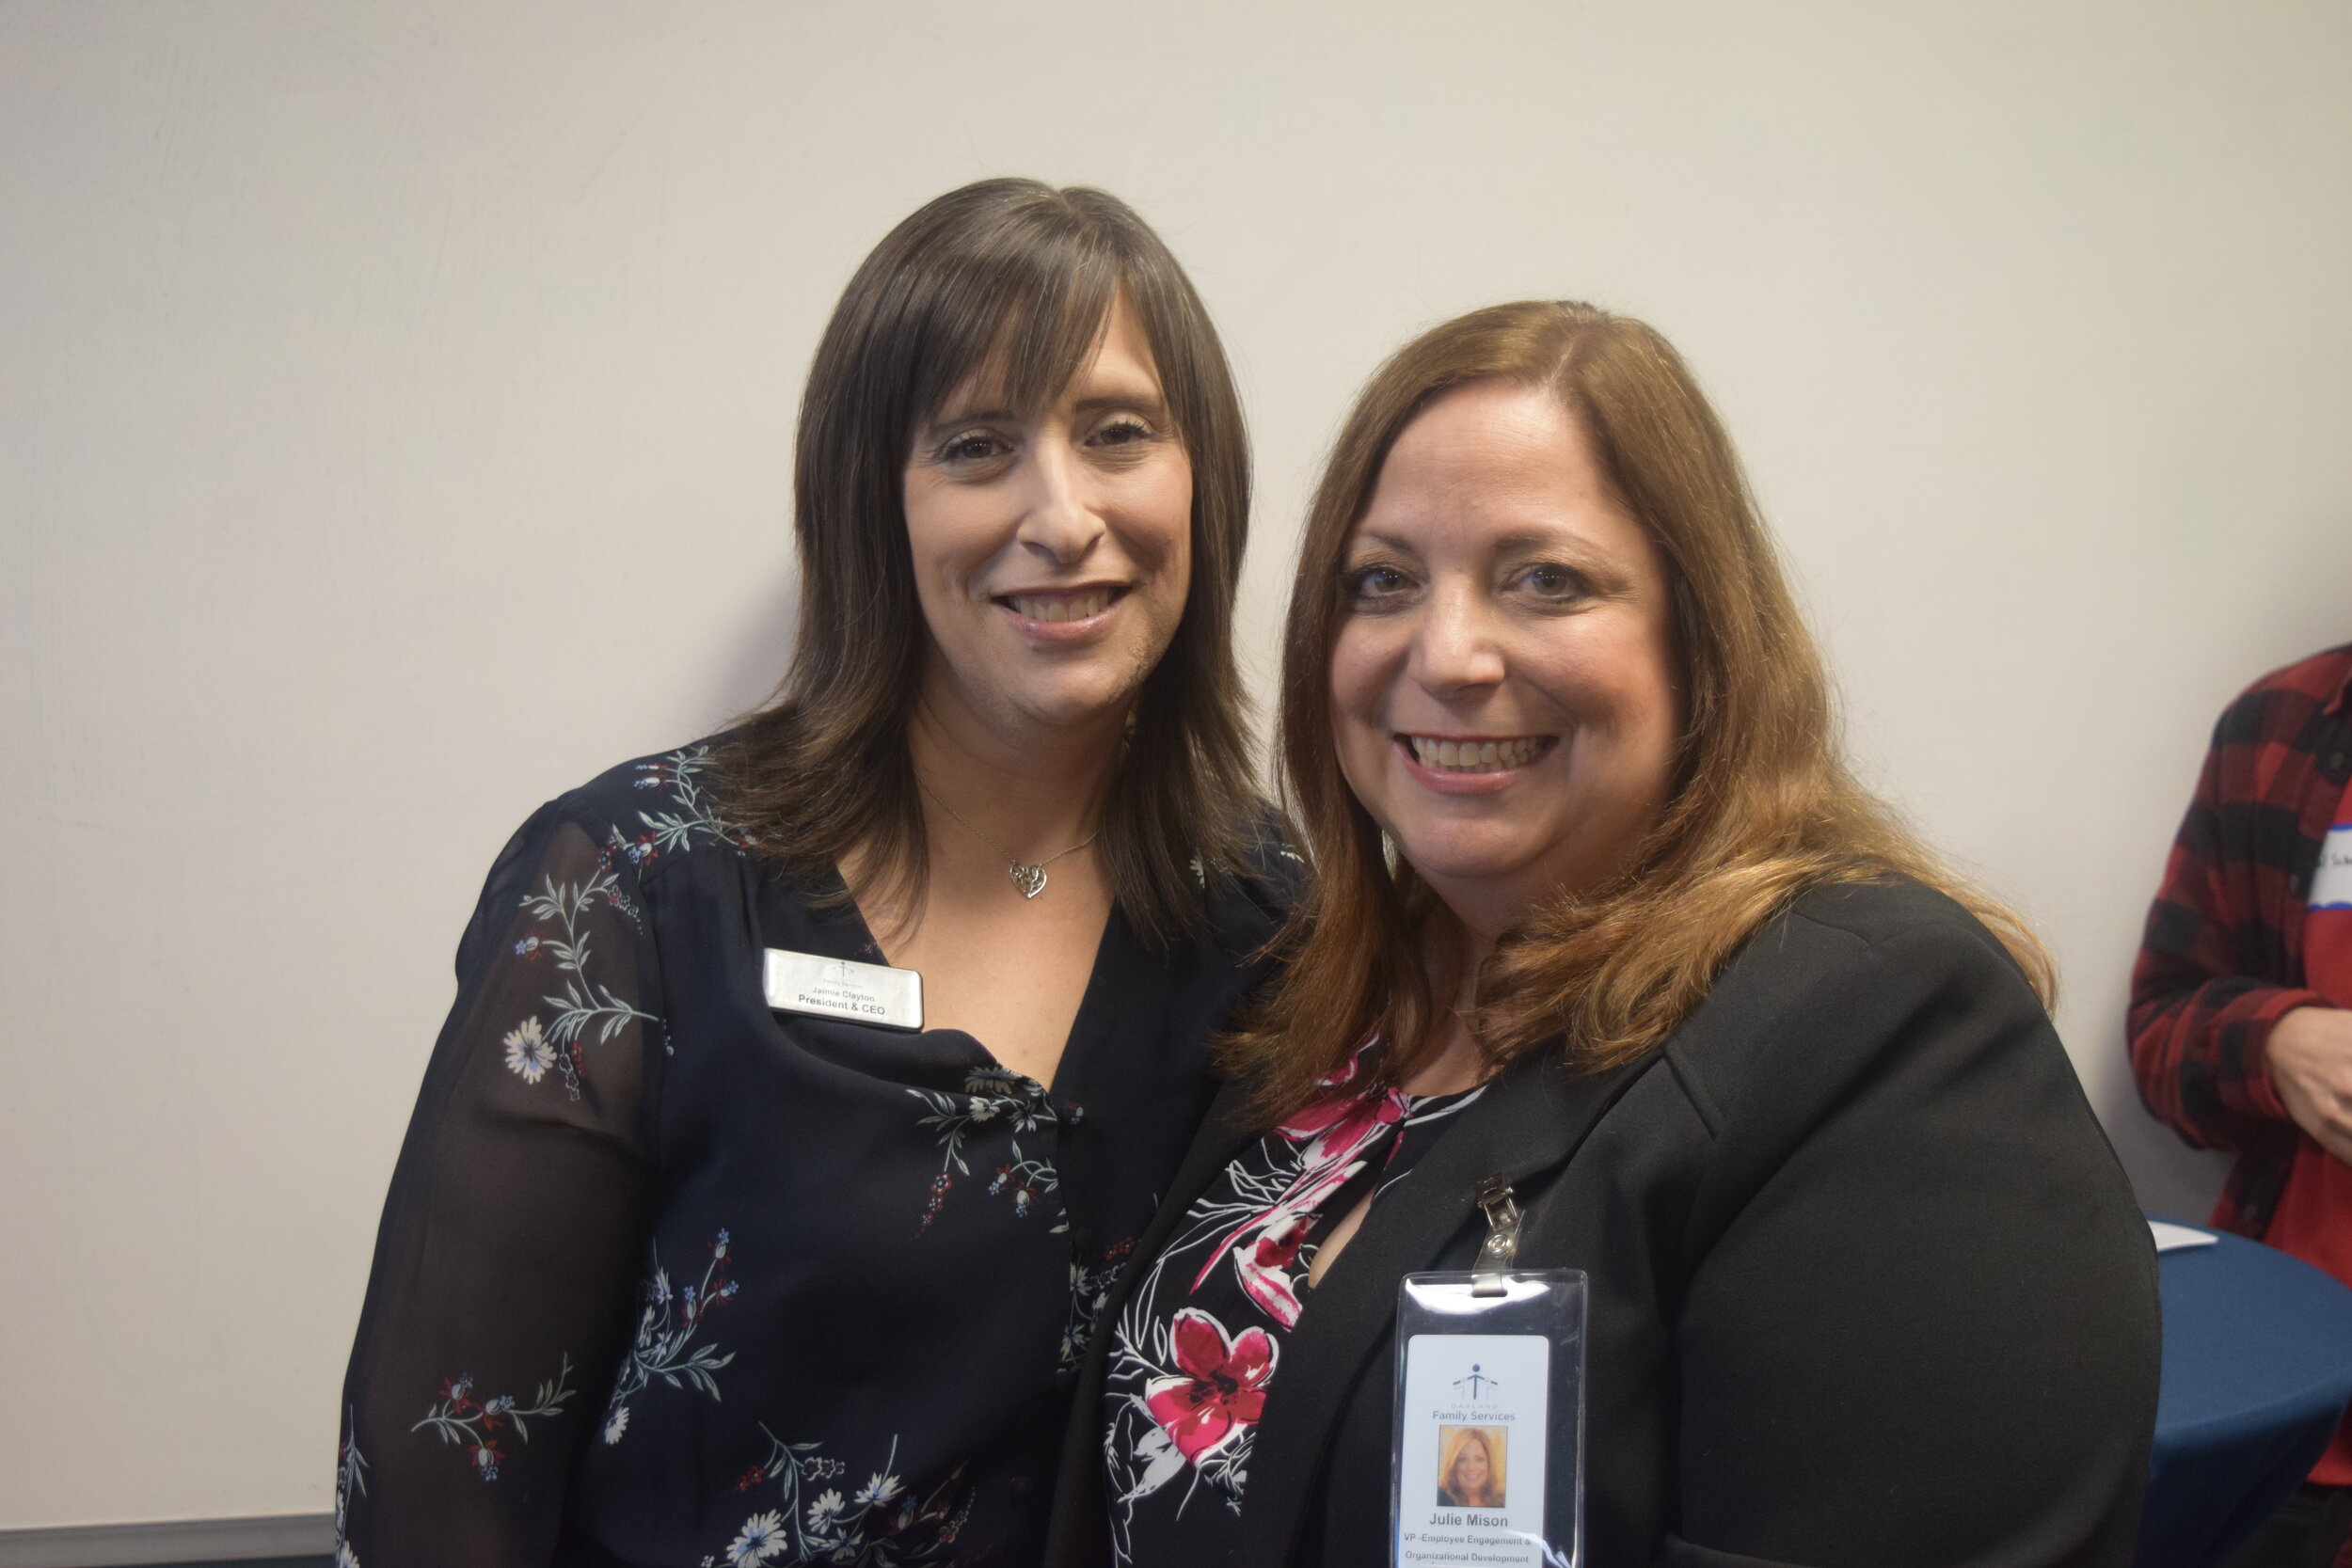 President/CEO Jaimie Clayton with Julie Mison, Vice President of Employee Engagement and Organizational Development.